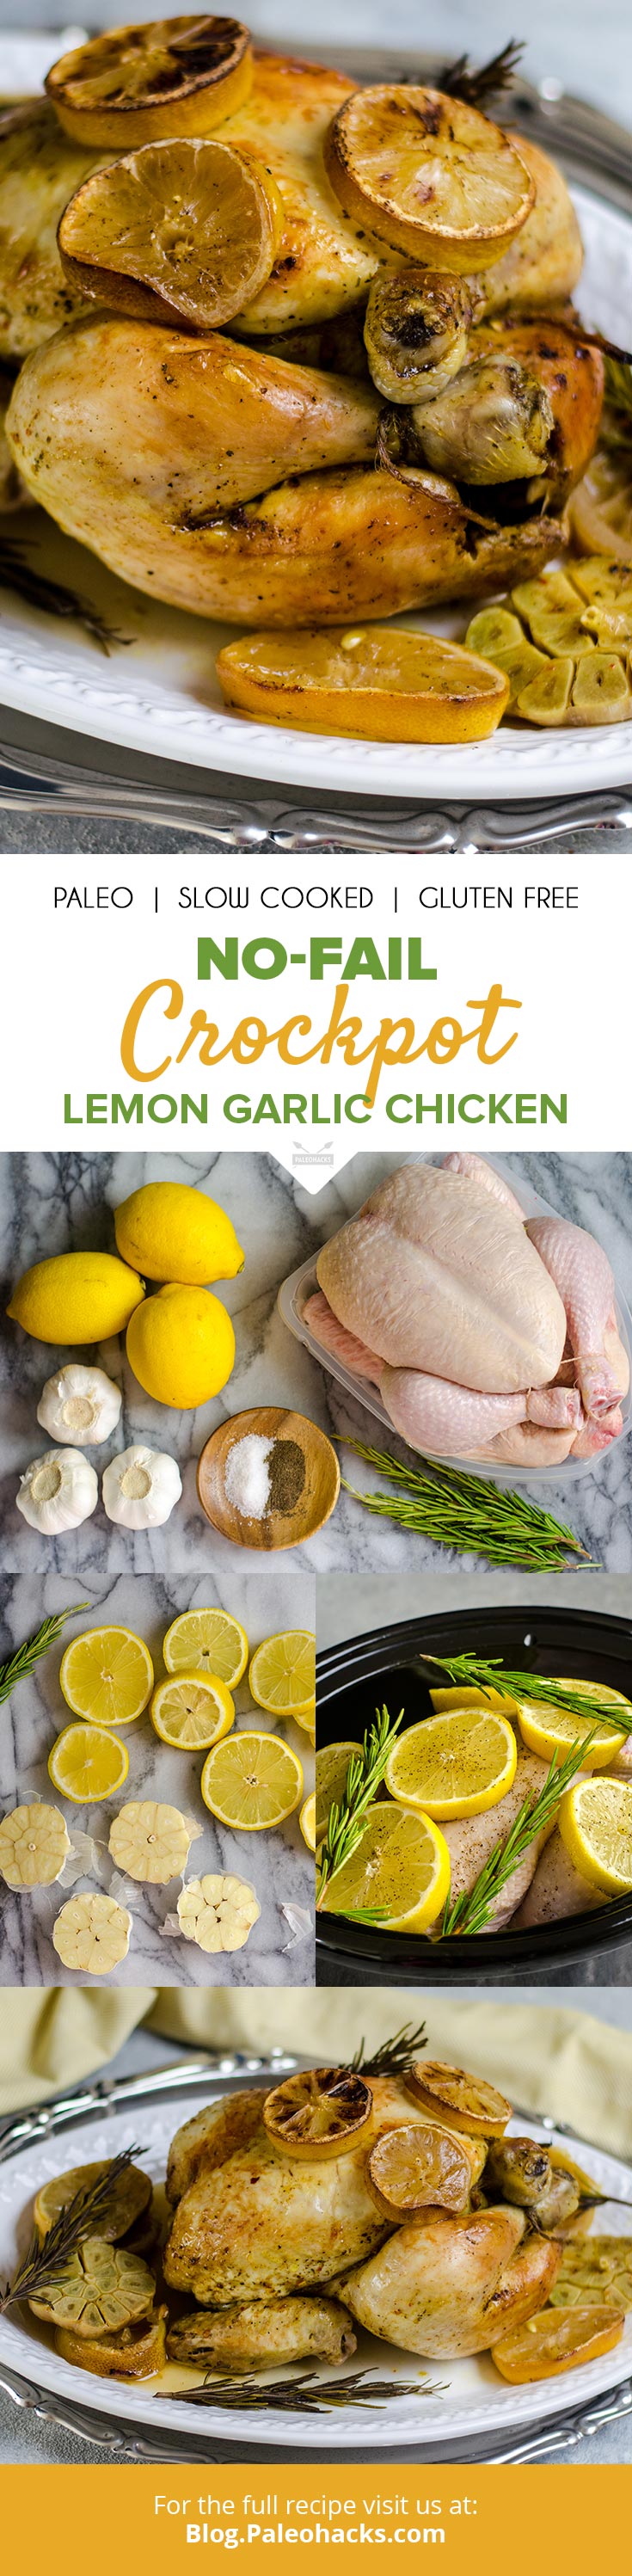 Rubbed with seasoning and nested on a bed of garlic and lemon, this lemon garlic chicken only requires four ingredients and a slowcooker.